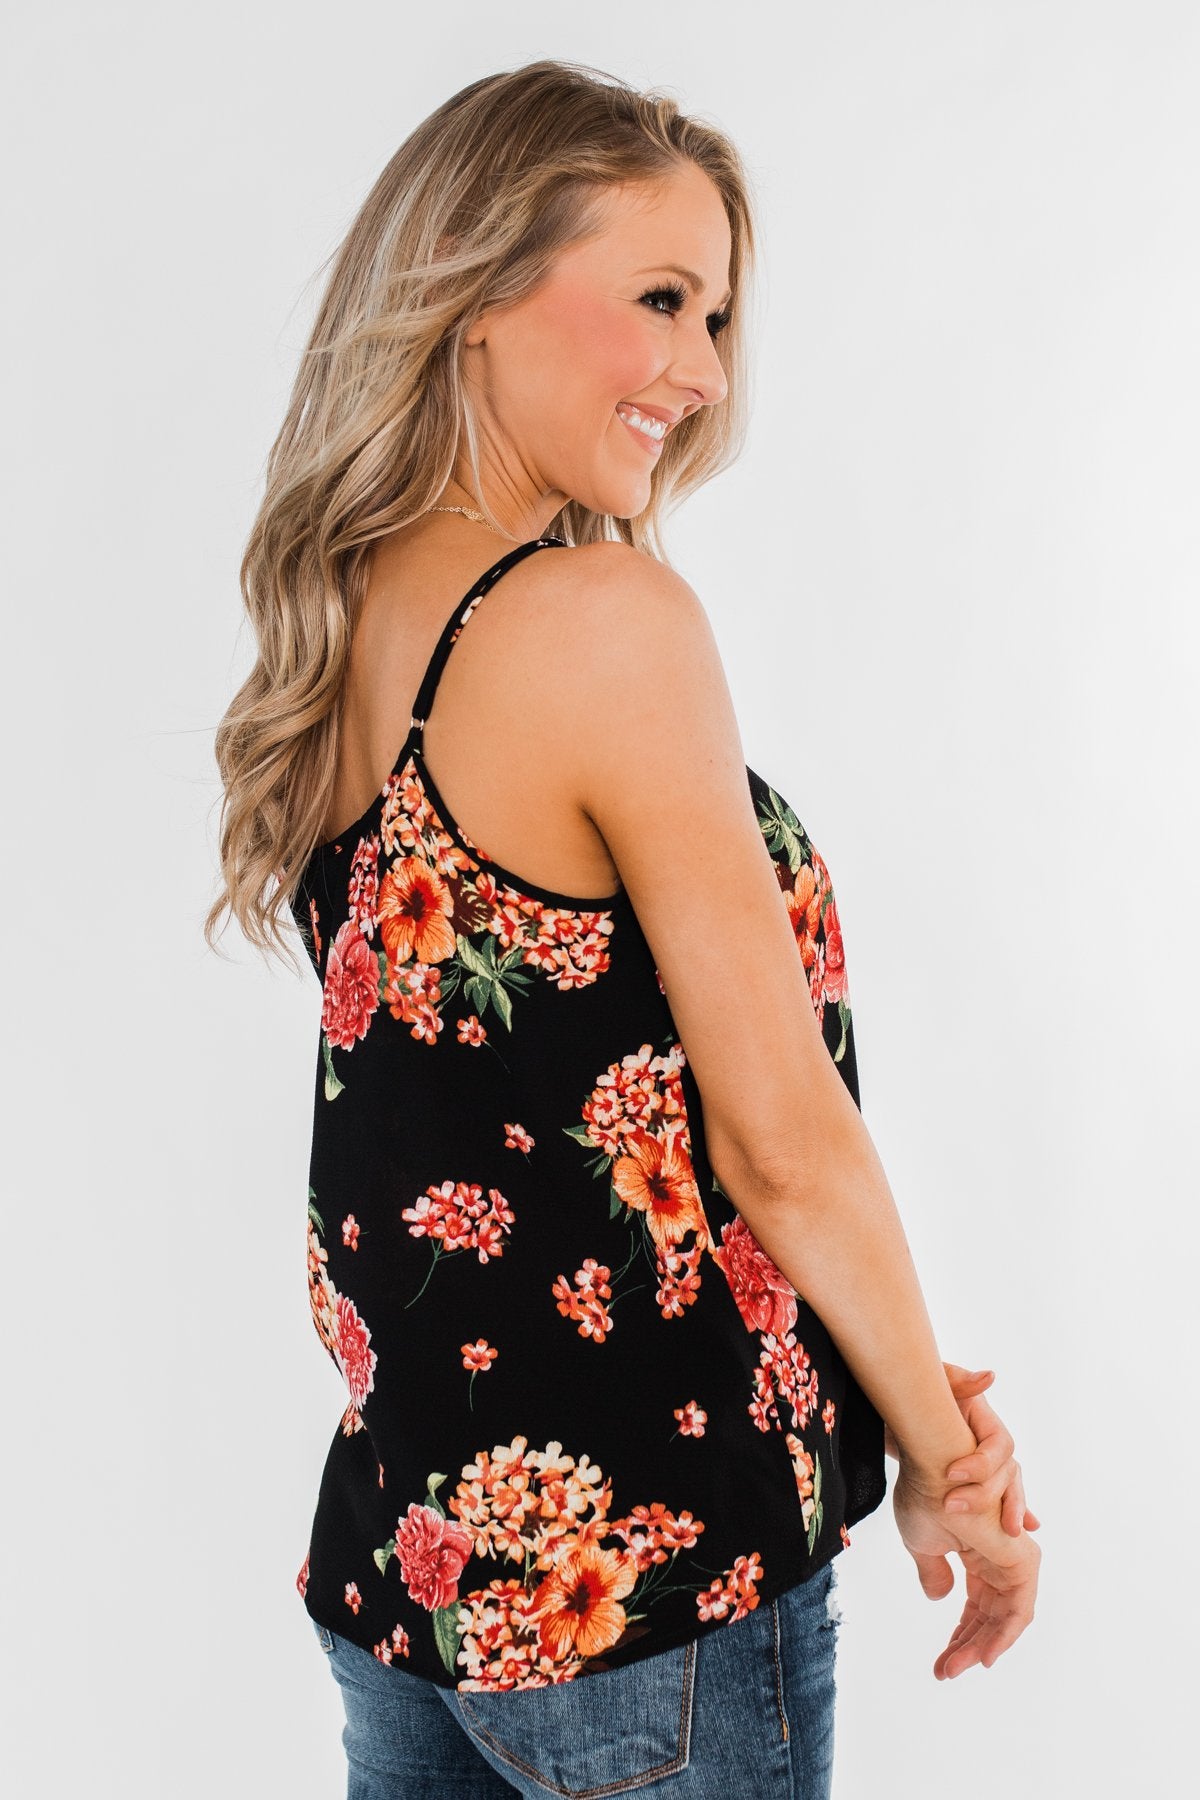 Out of Reach Floral Tank Top- Black